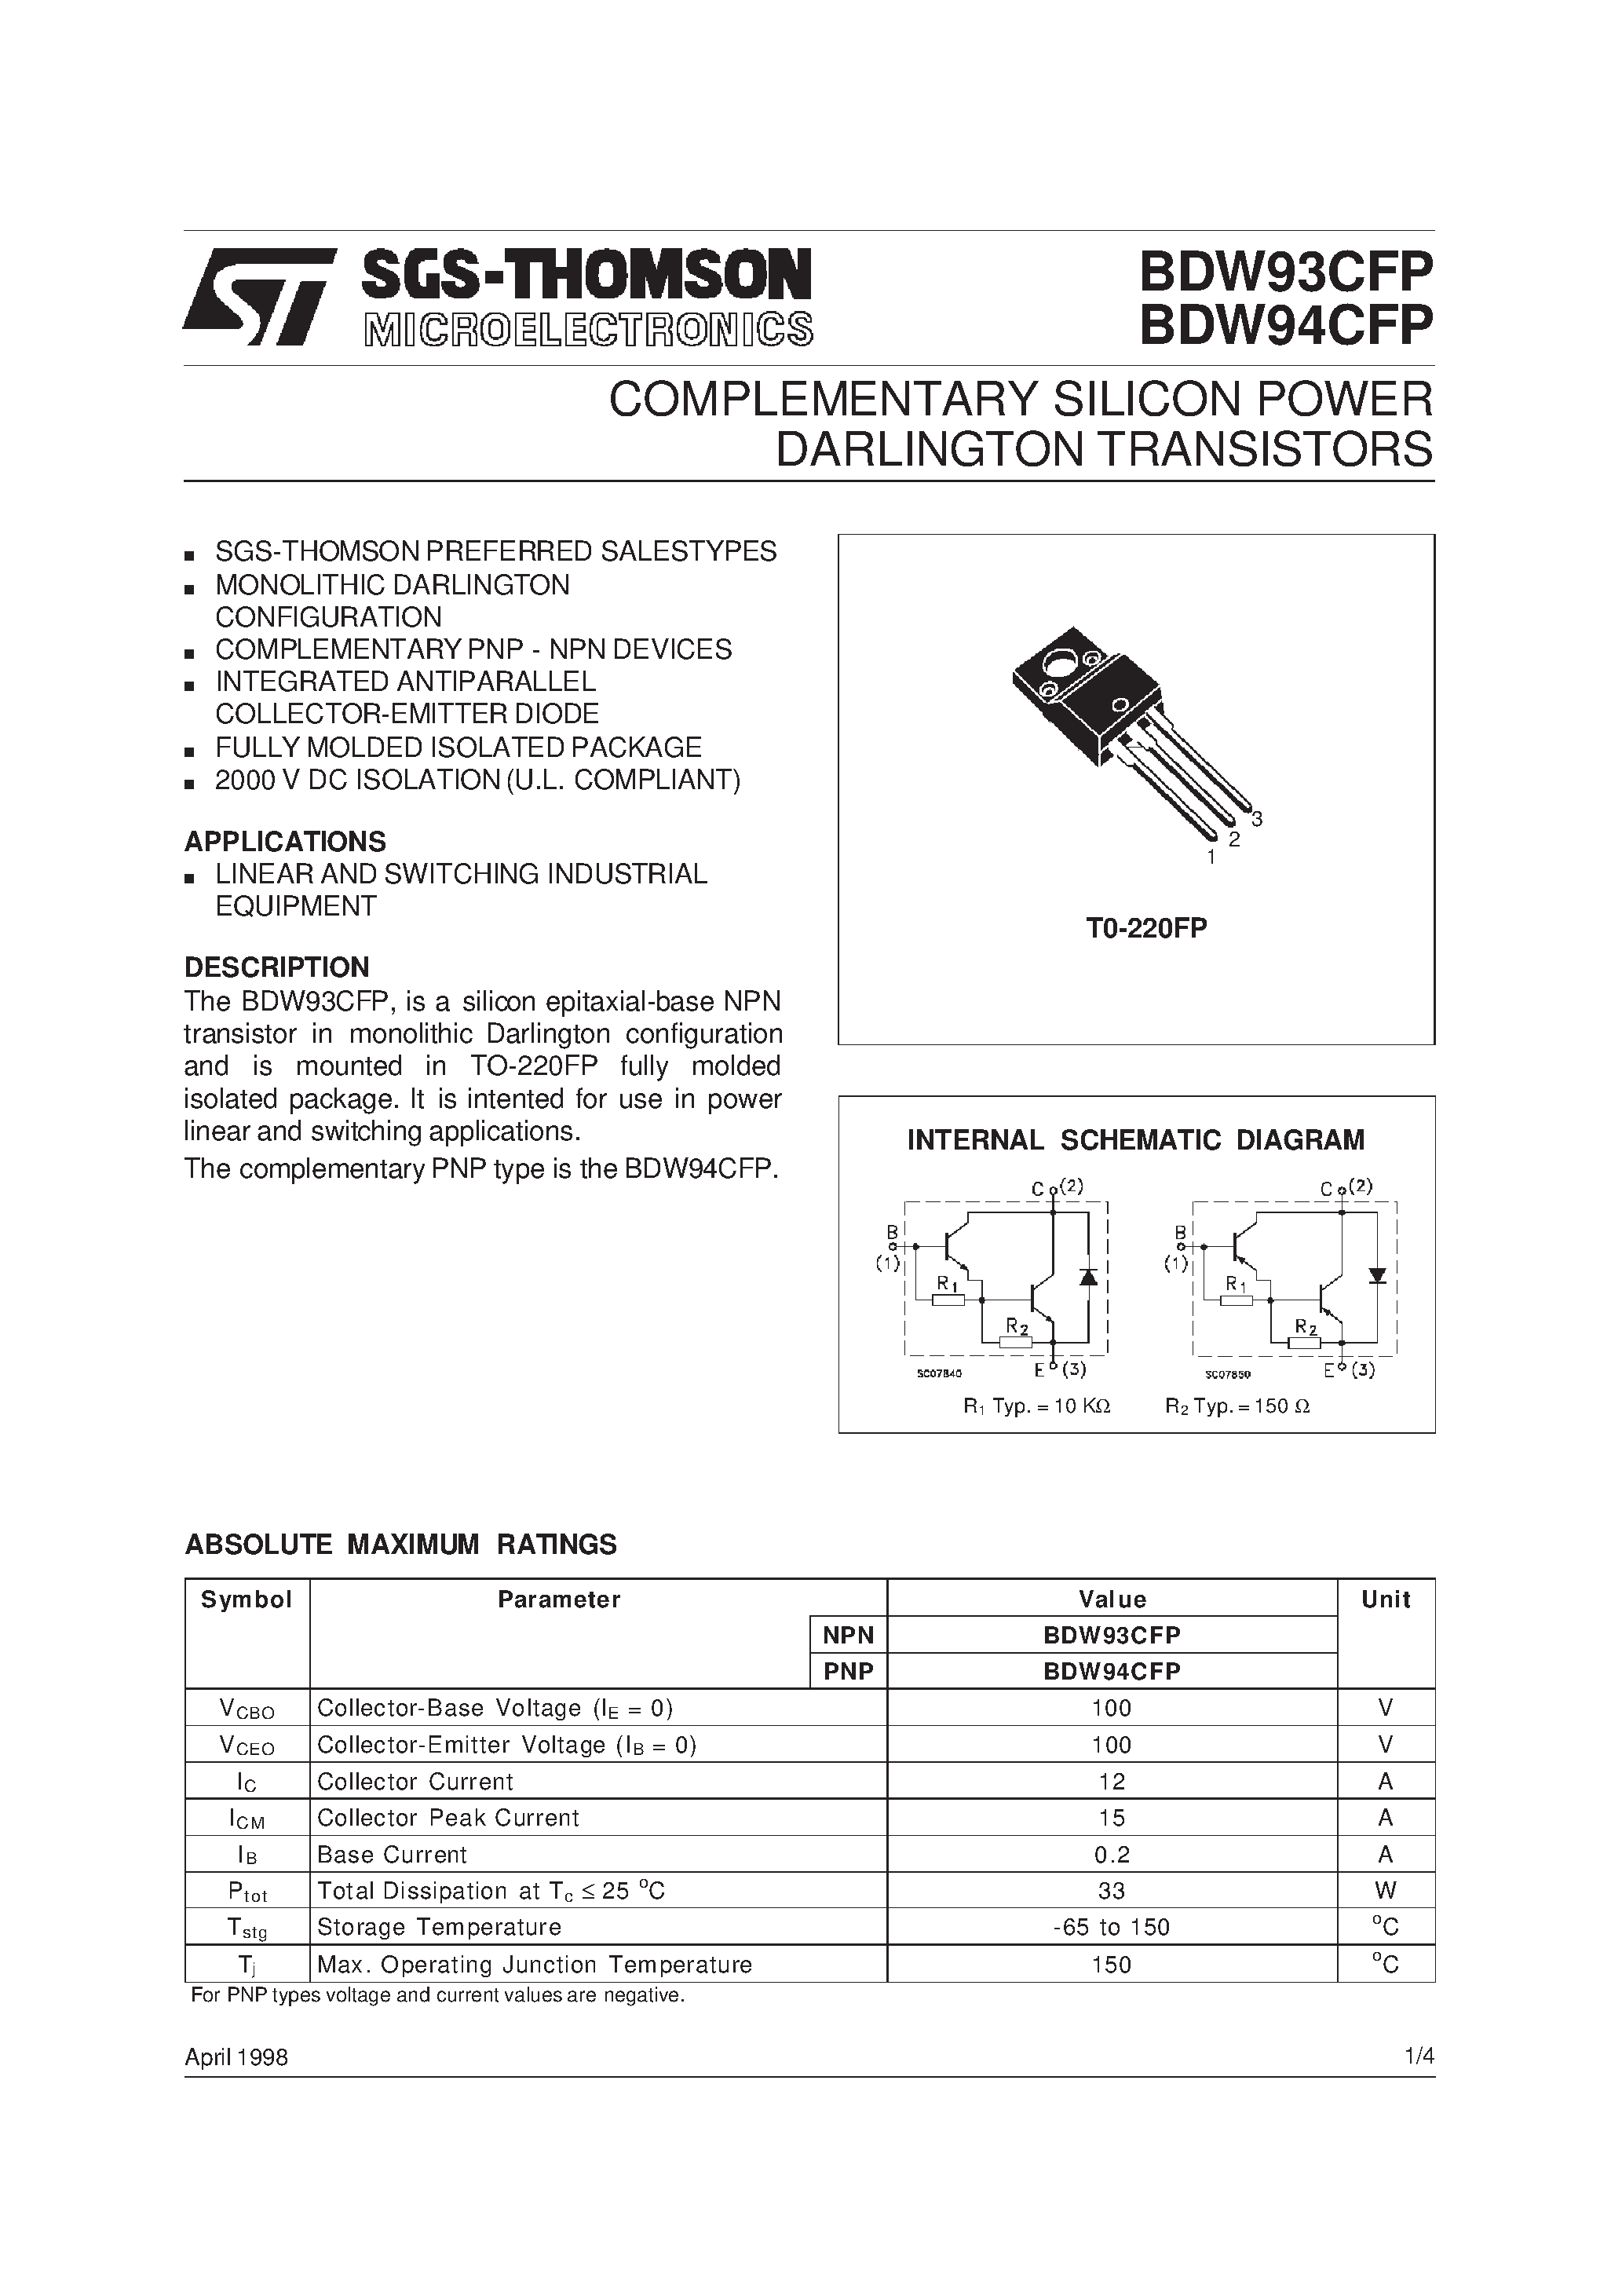 Datasheet BDW93CFP - COMPLEMENTARY SILICON POWER DARLINGTON TRANSISTORS page 1